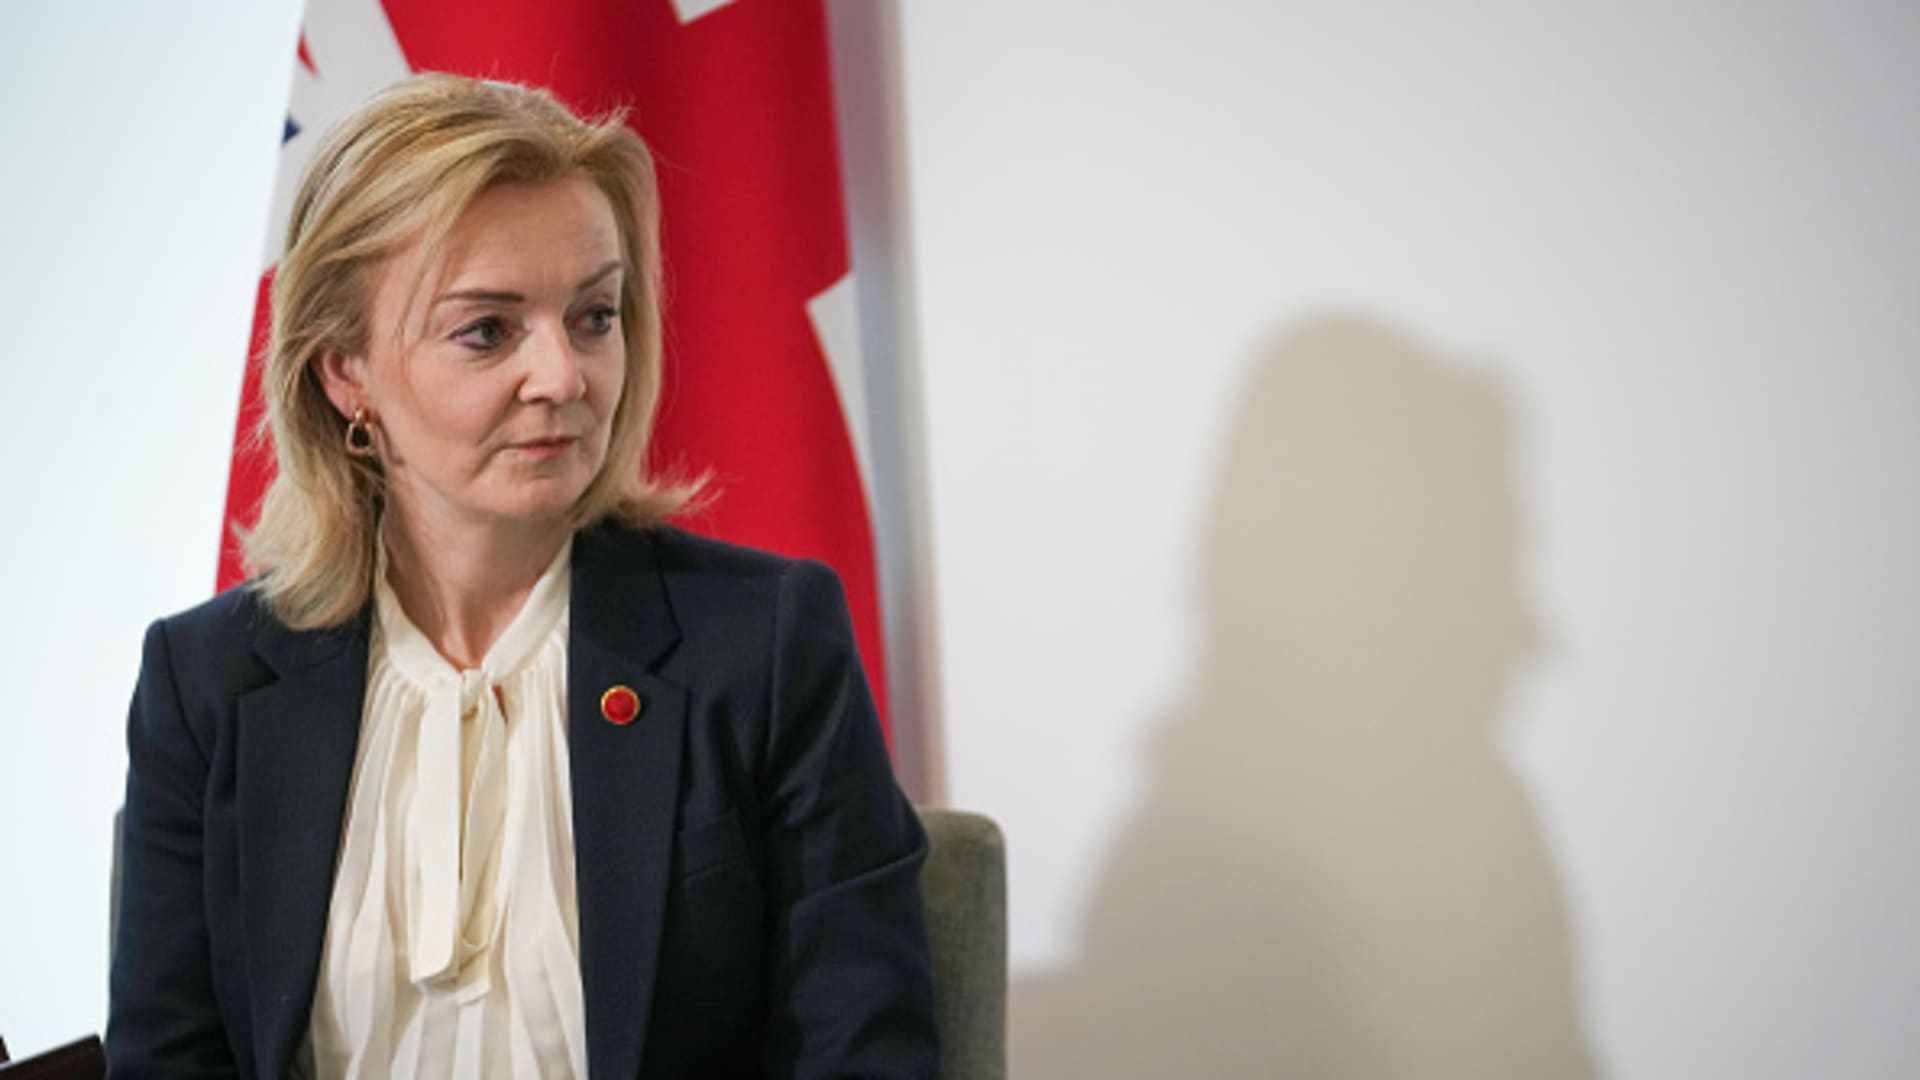 British Foreign Secretary Liz Truss at a G7 meeting in the Museum of Liverpool.